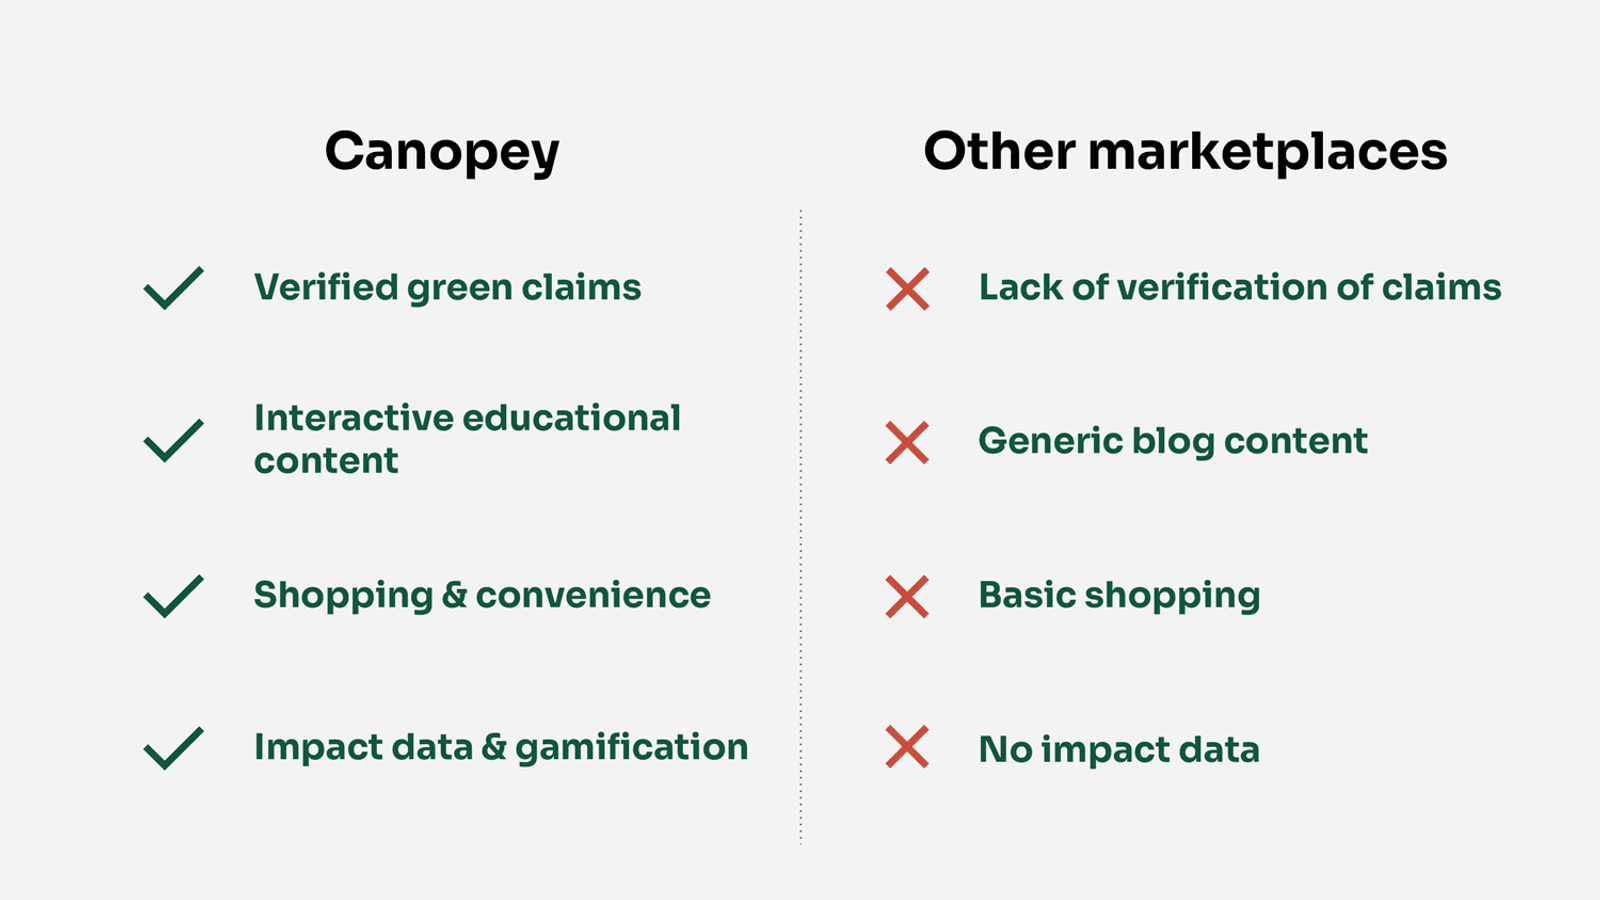 List of ticks and crosses for Canopey vs other marketplaces